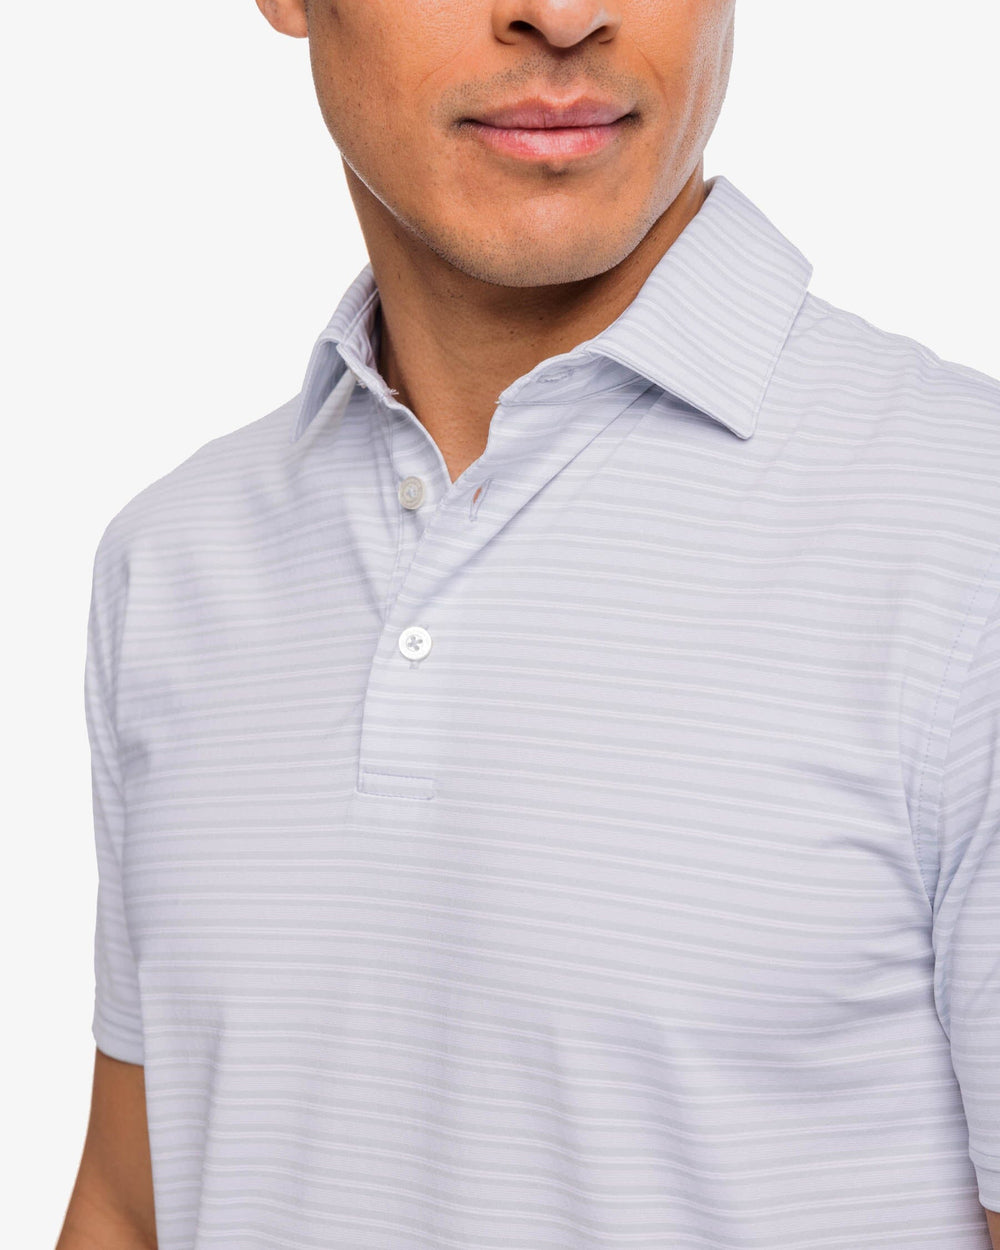 The detail view of the Southern Tide brrr°®-eeze Bowen Stripe Performance Polo Shirt by Southern Tide - Slate Grey